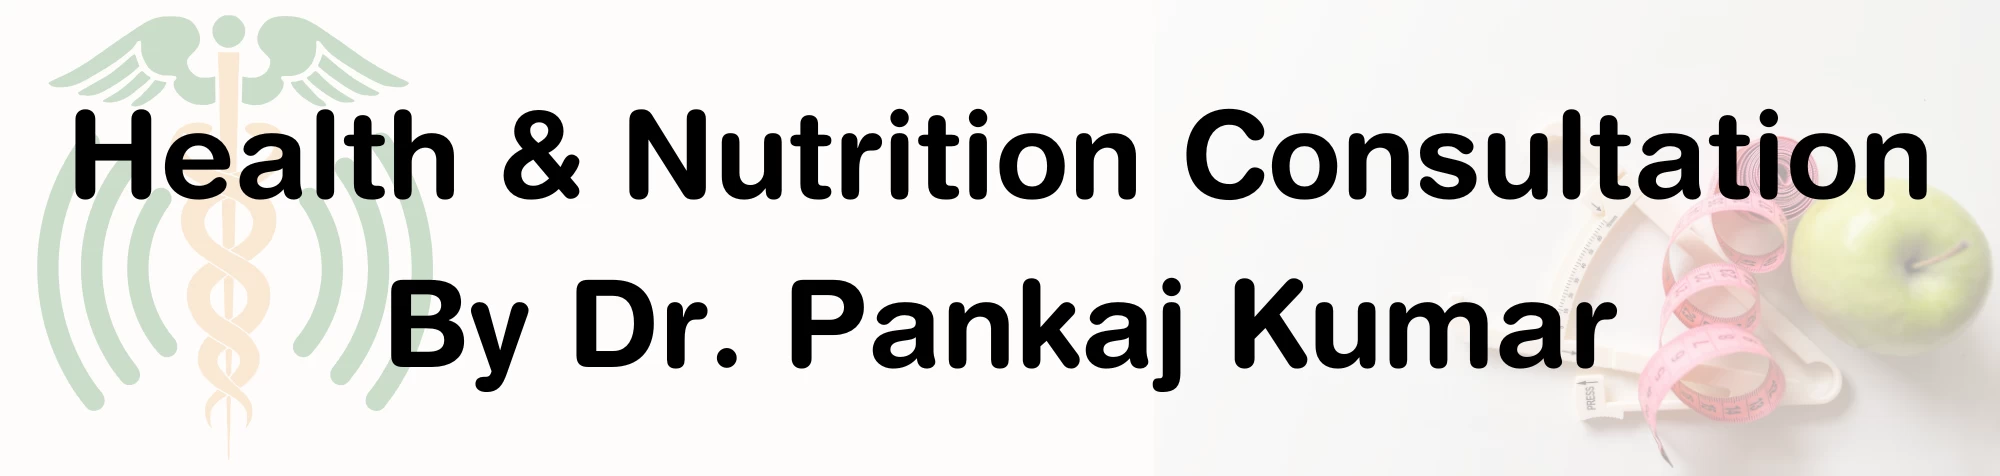 Health and nutrition consultation